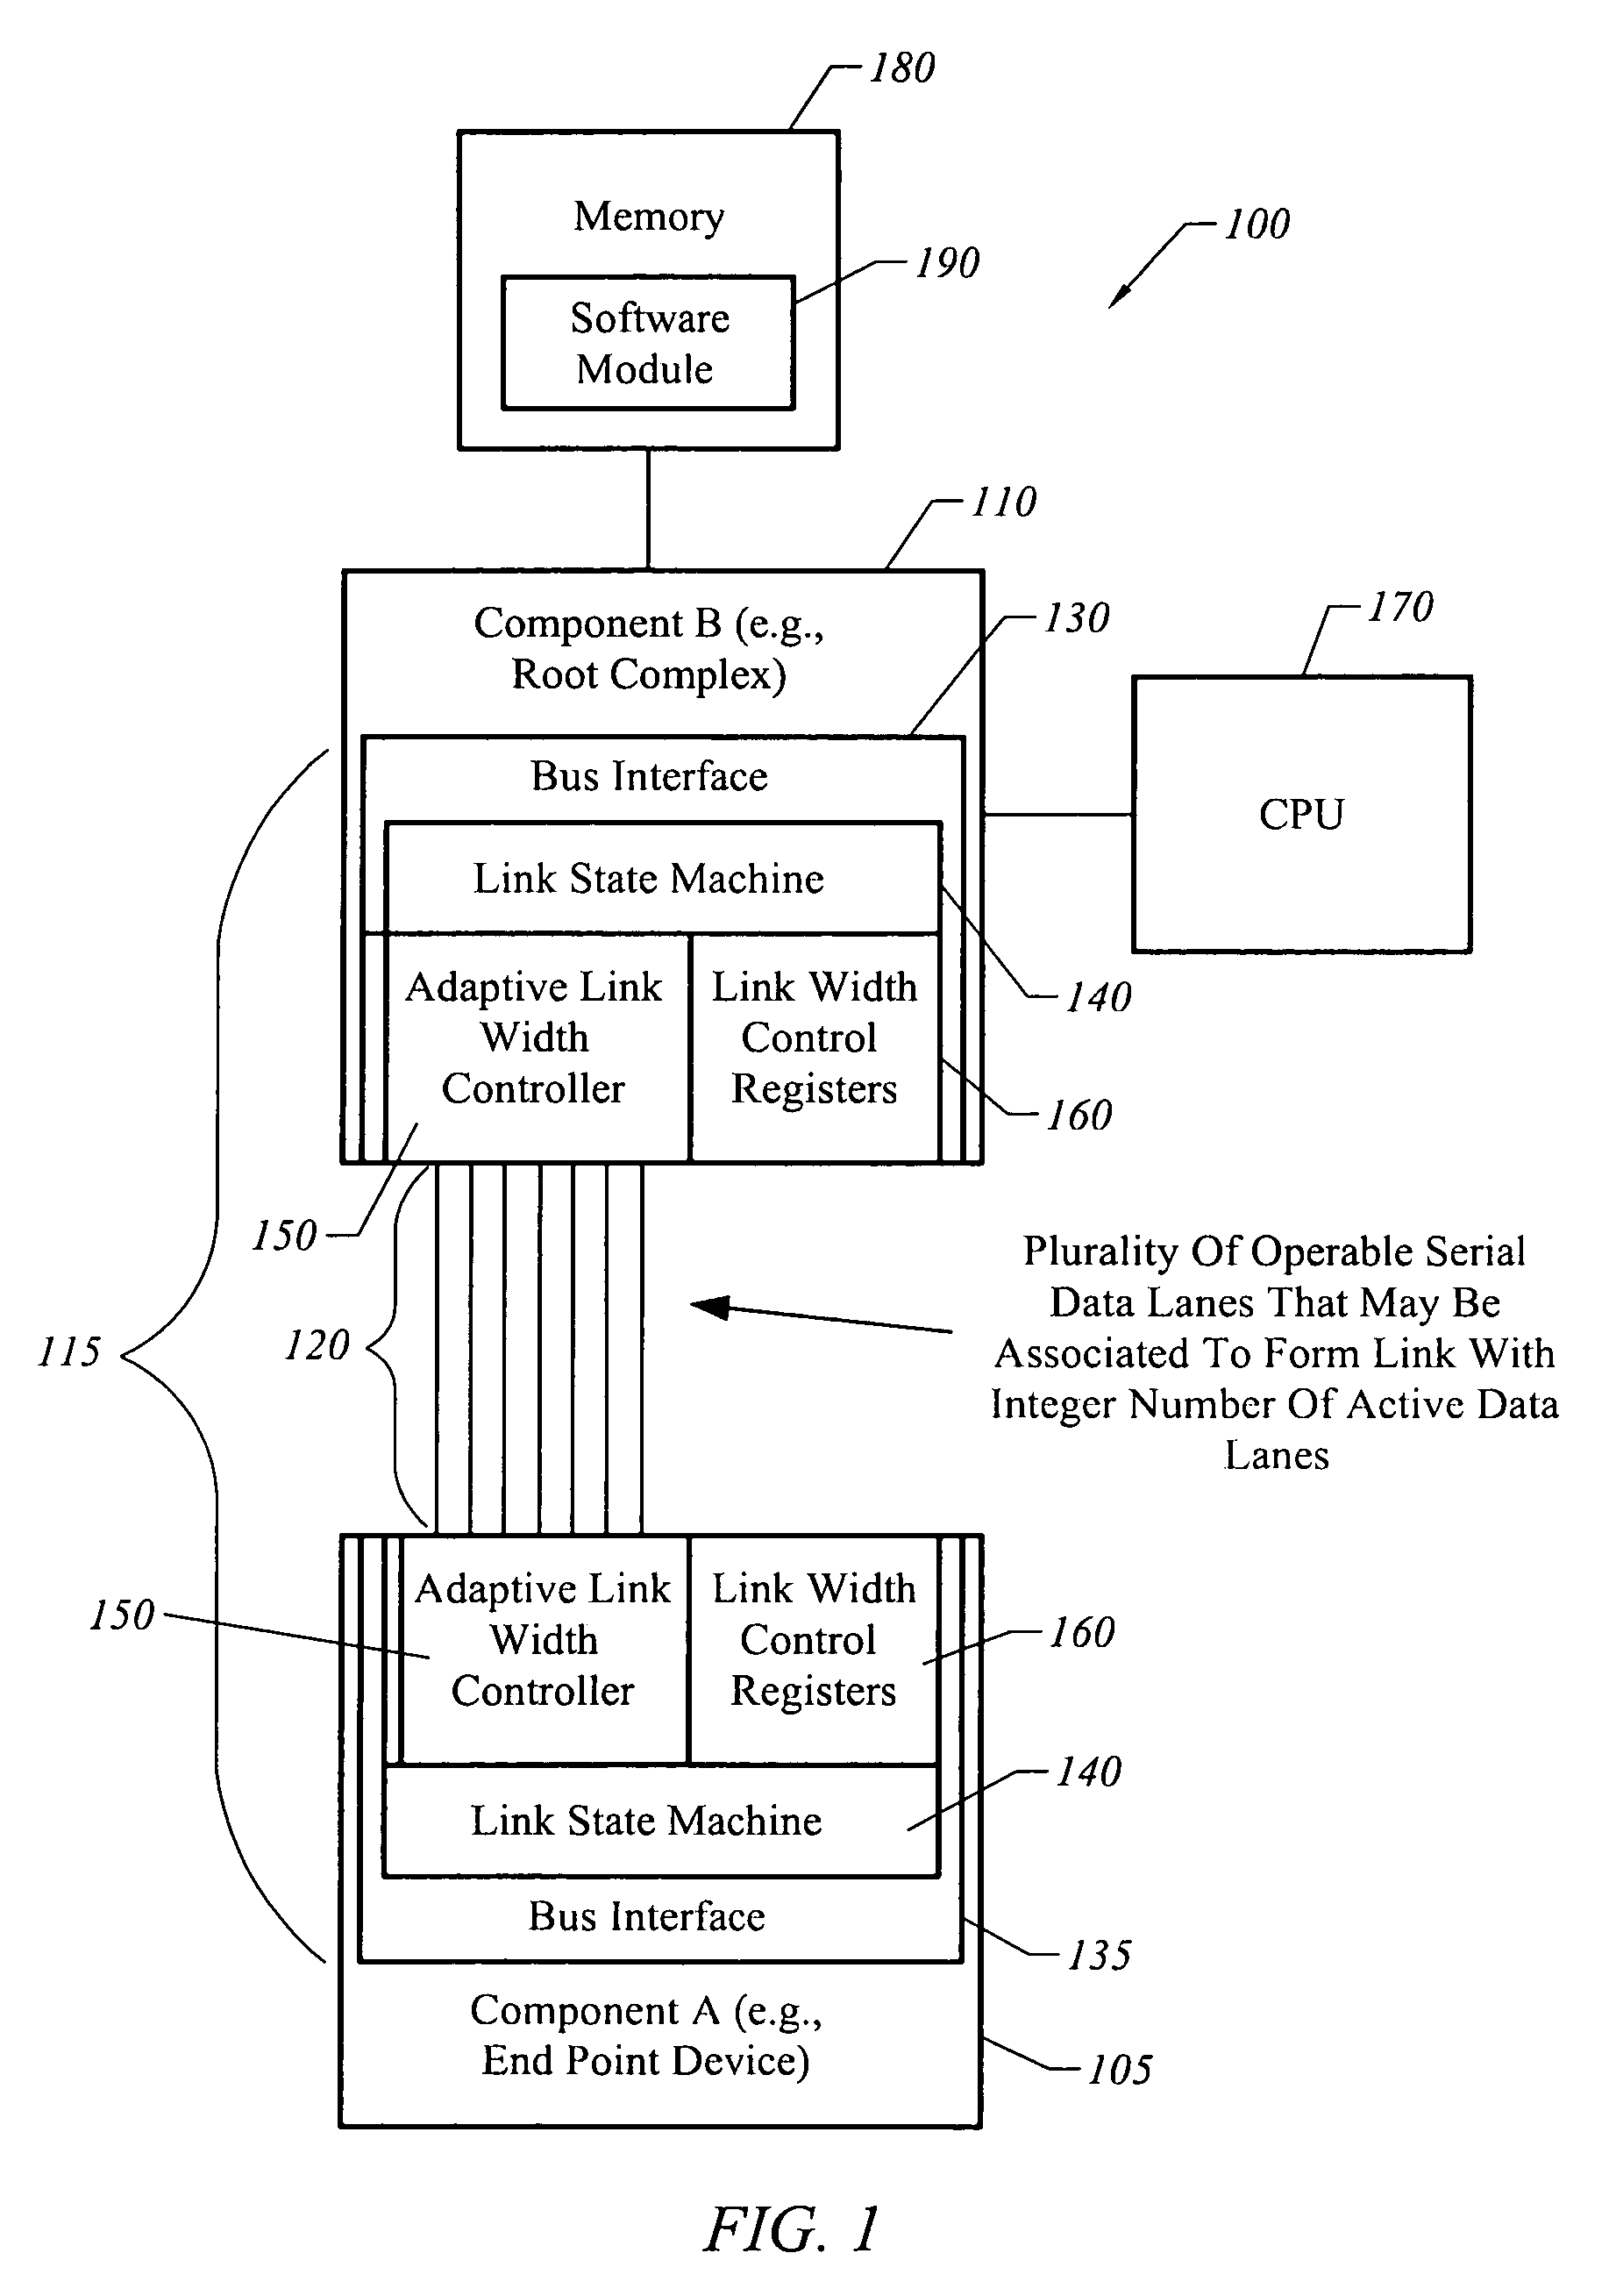 Logical-to-physical lane assignment to reduce clock power dissipation in a bus having a variable link width